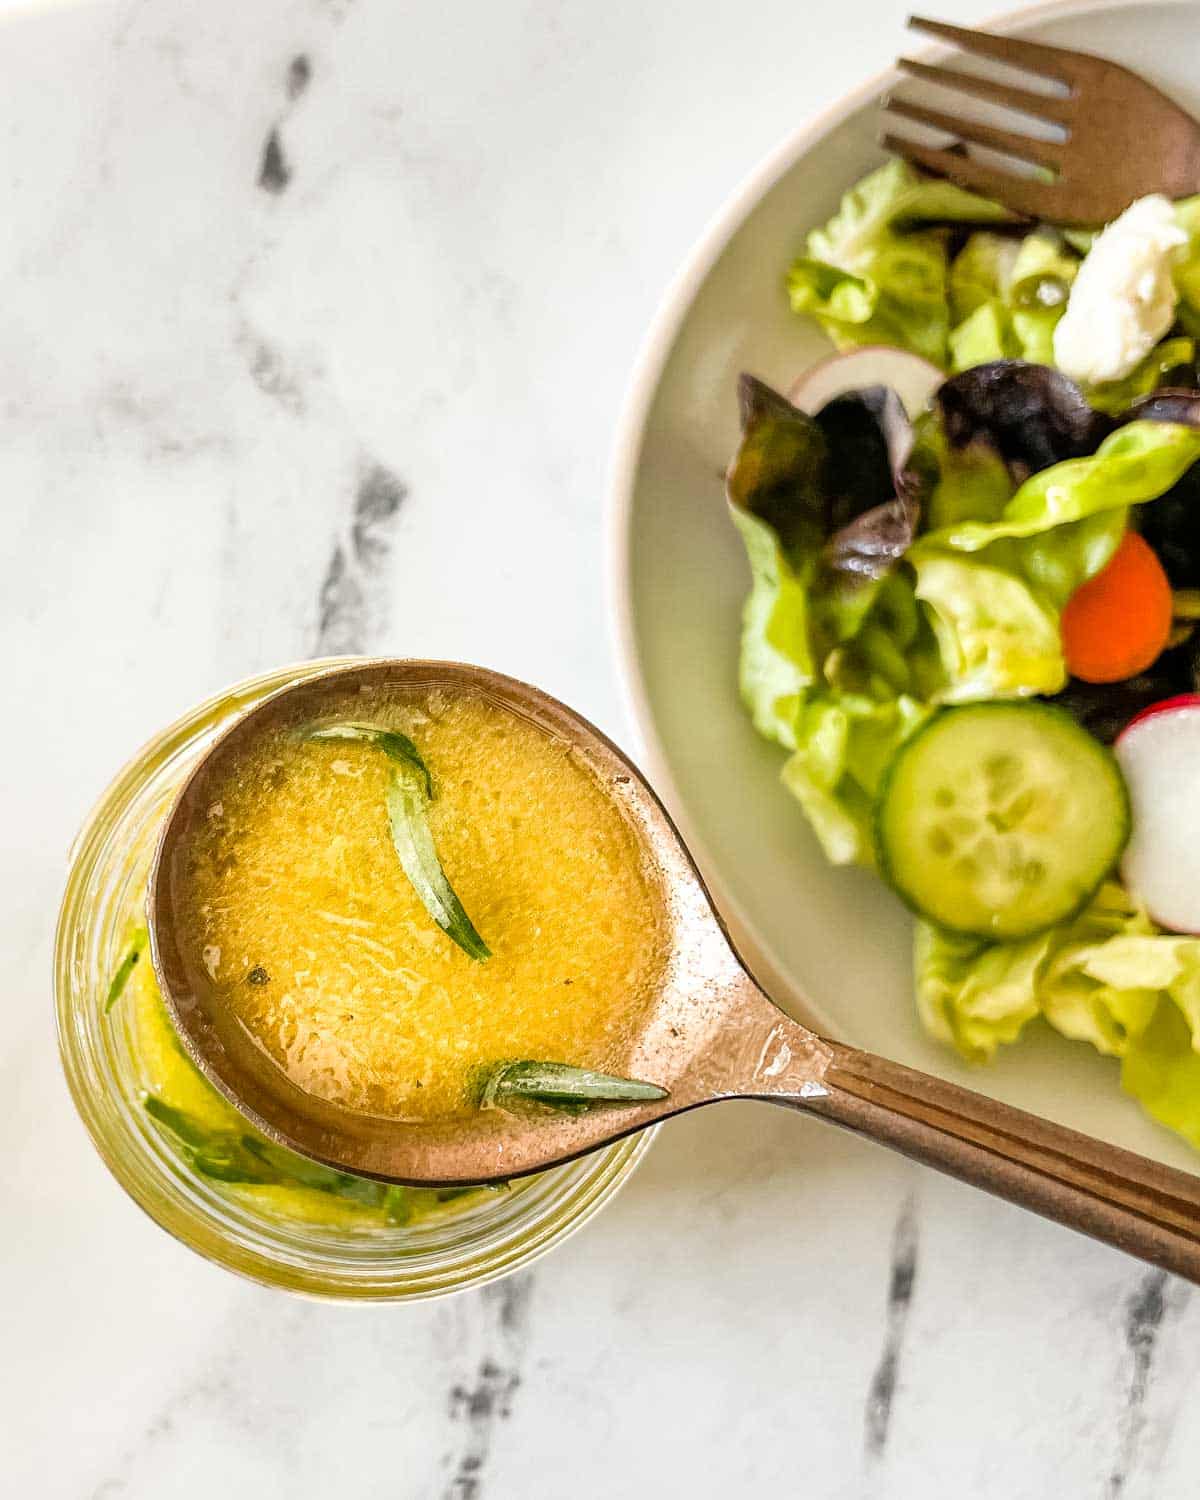 A spoonful of lemon herb vinaigrette is shown in the foreground over a green salad.